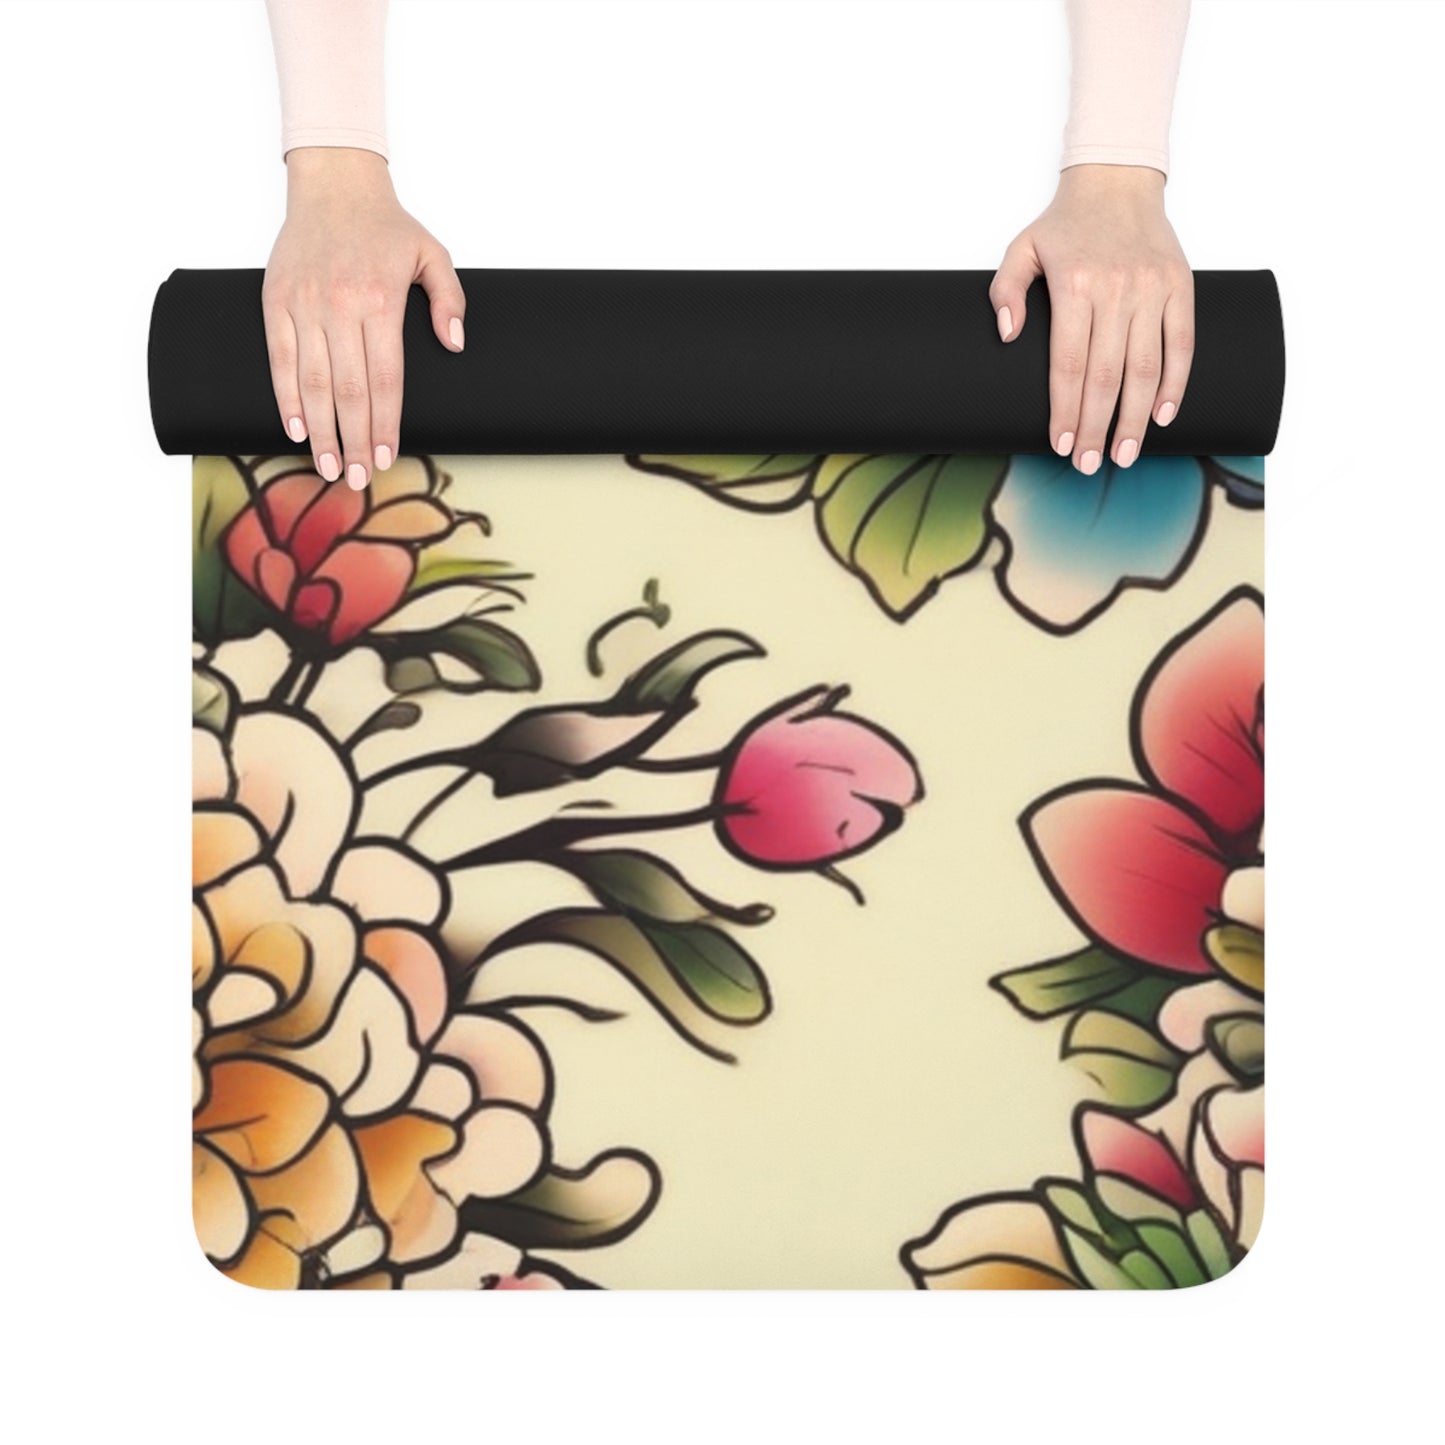 Flowers Melody Rubber Yoga Mat